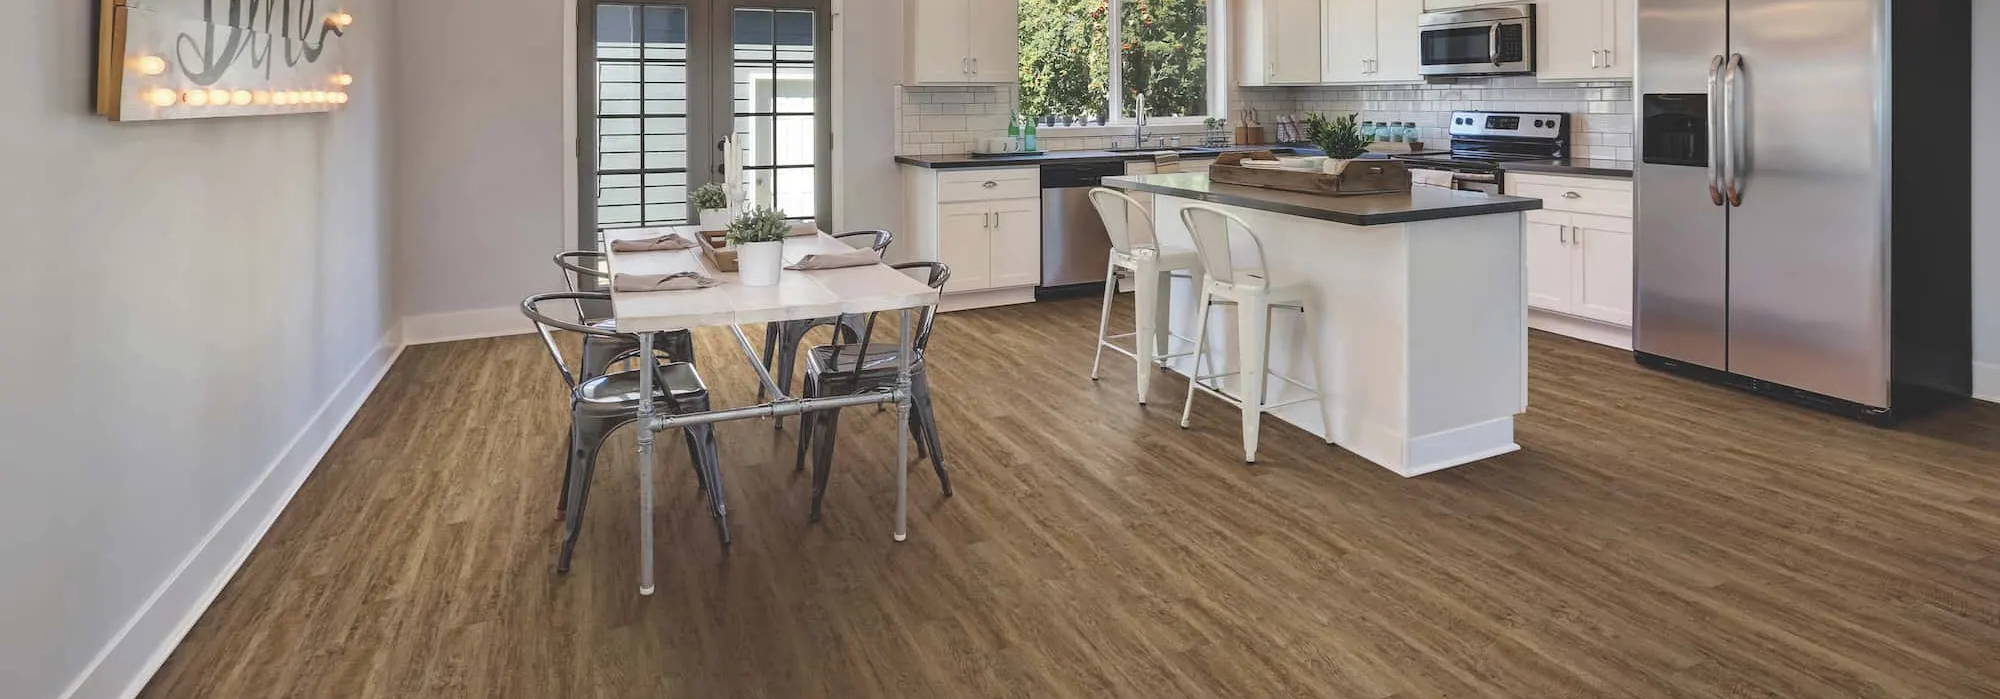 Vinyl Flooring perfect for Bathrooms or Kitchens